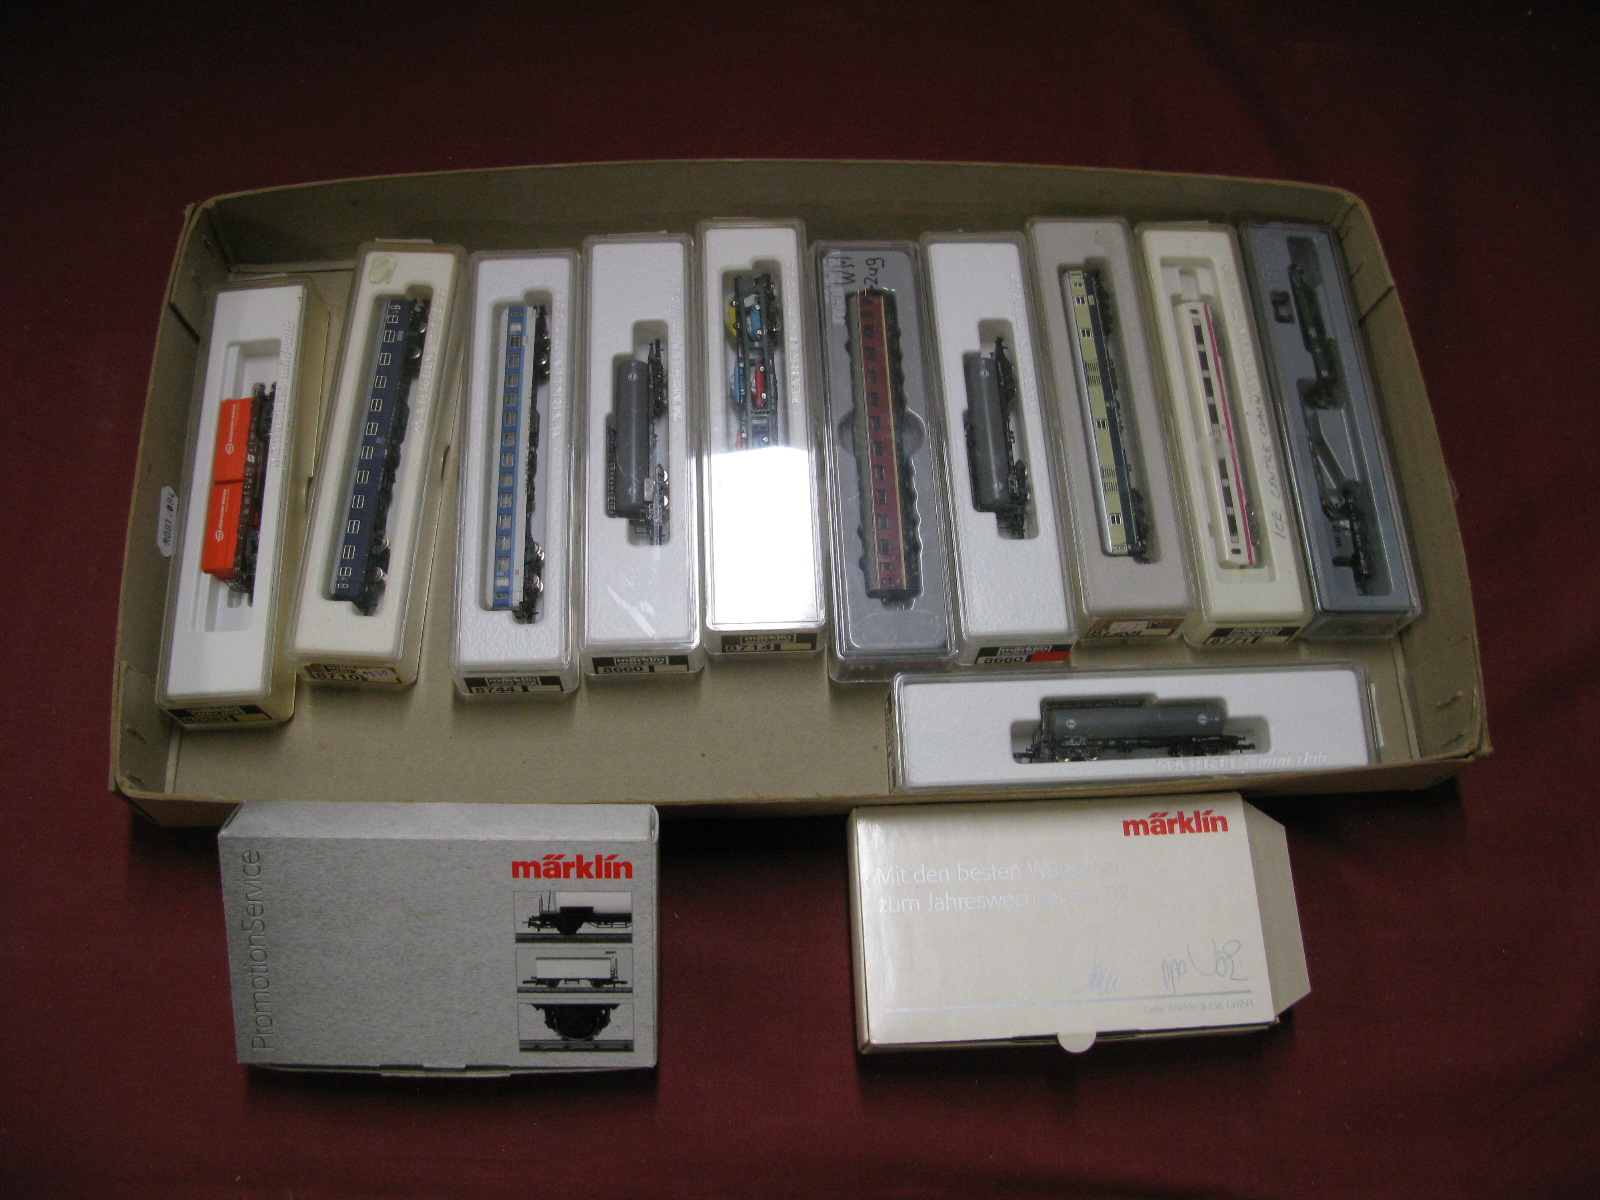 Thirteen Marklin 'Z' Gauge Pieces of Rolling Stock, including coaches and wagons, all boxed.